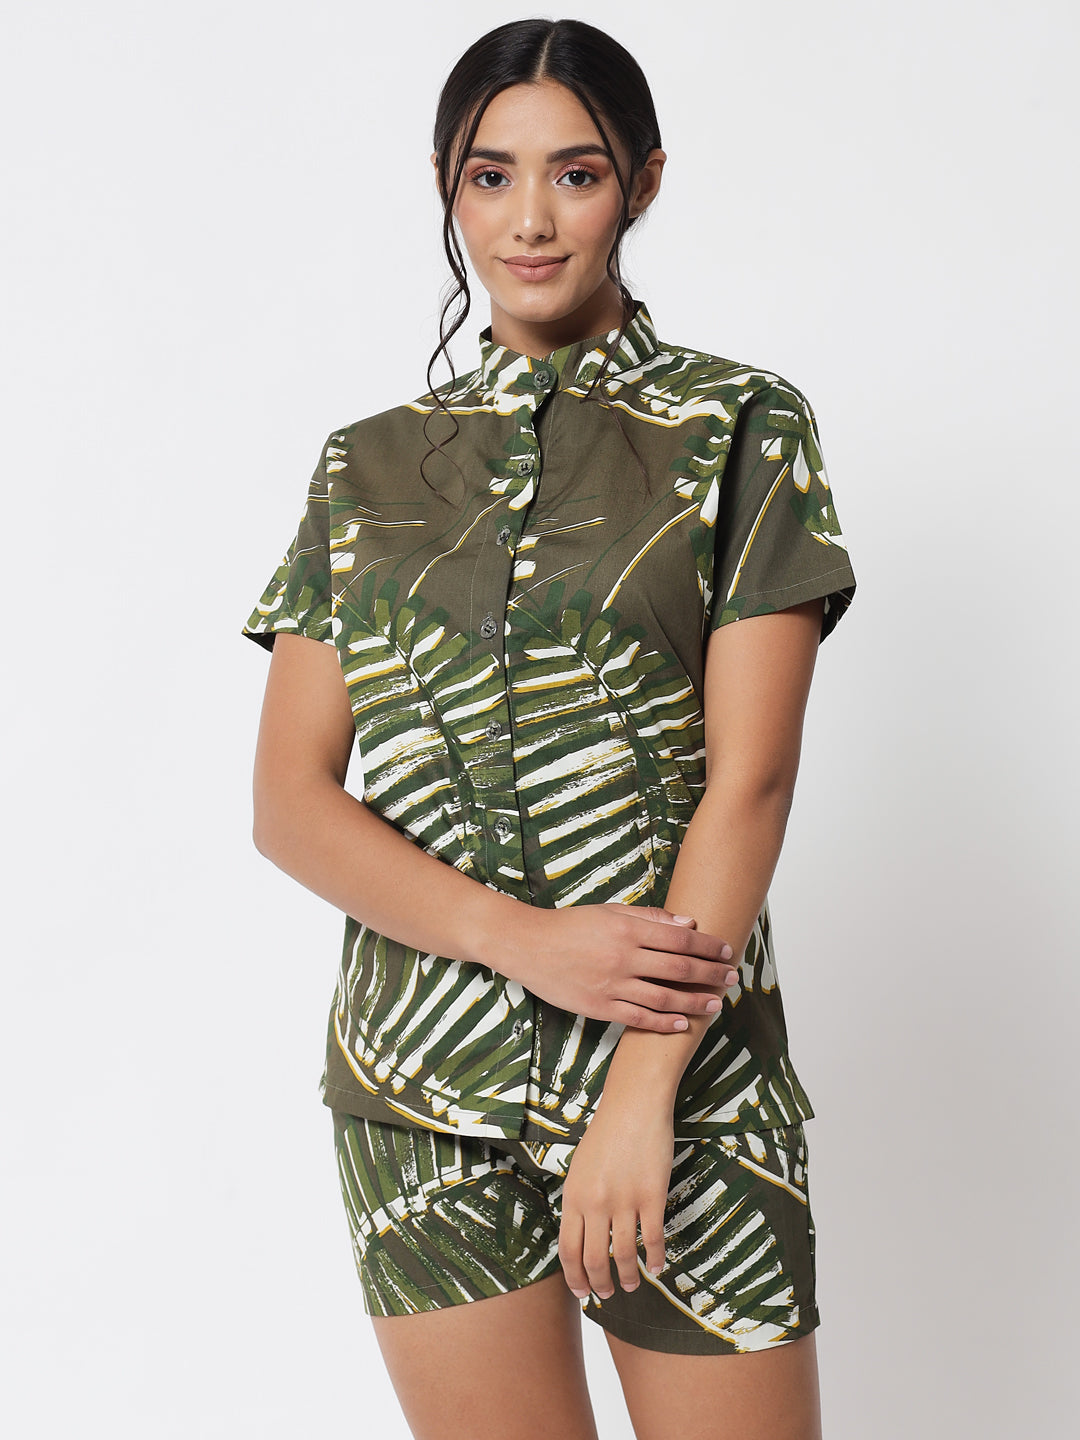 forest printed top & shorts set plus size